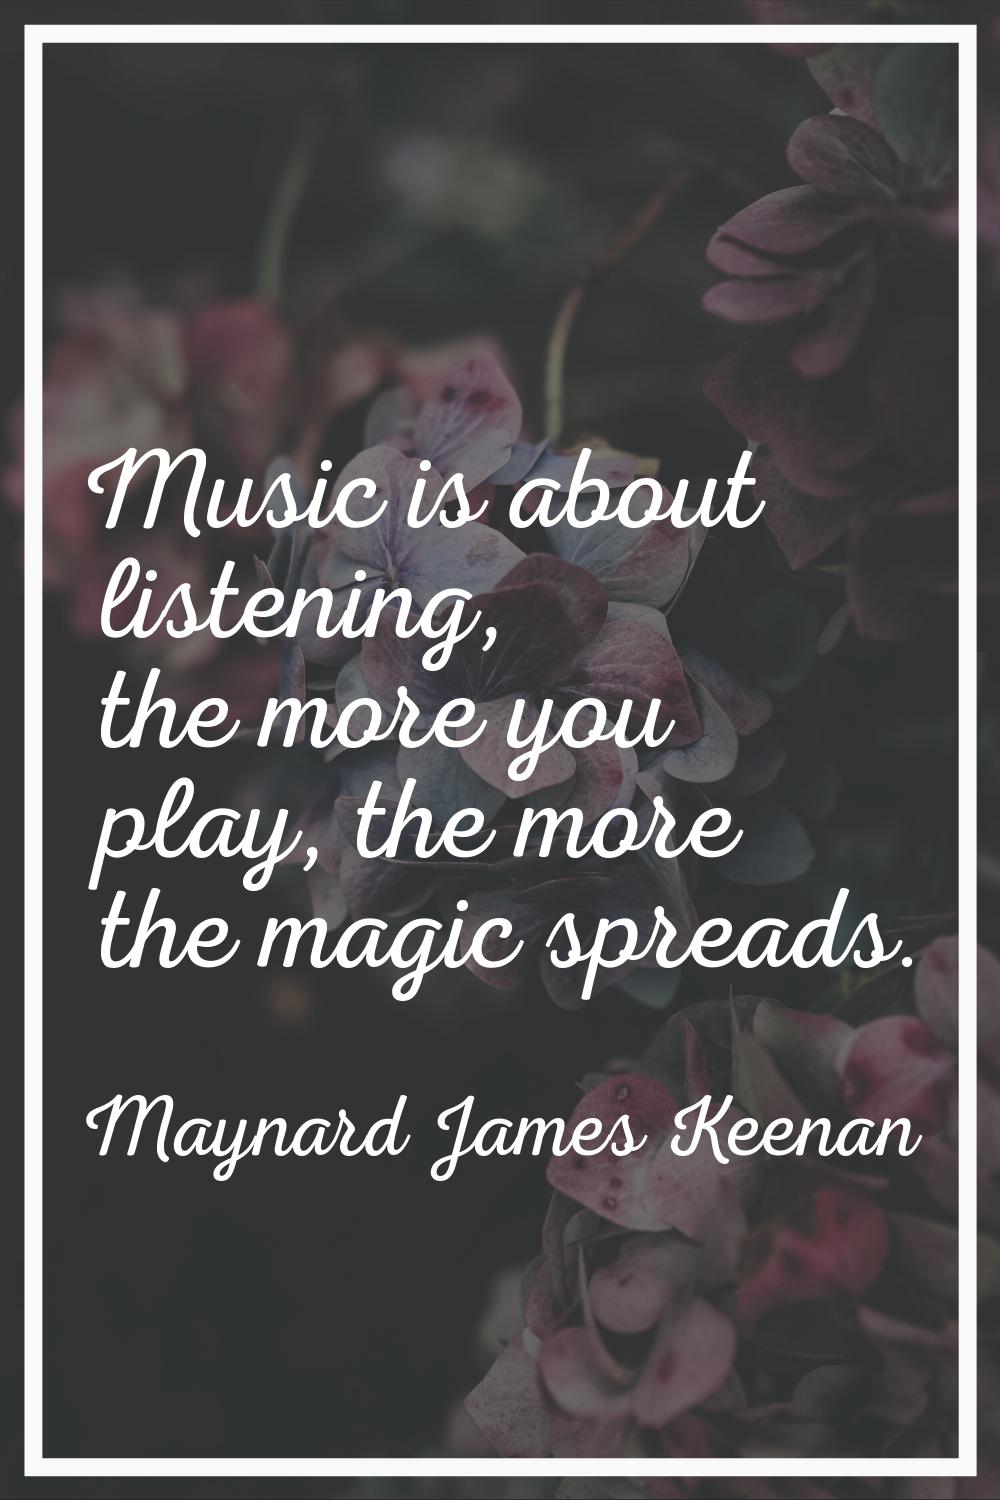 Music is about listening, the more you play, the more the magic spreads.